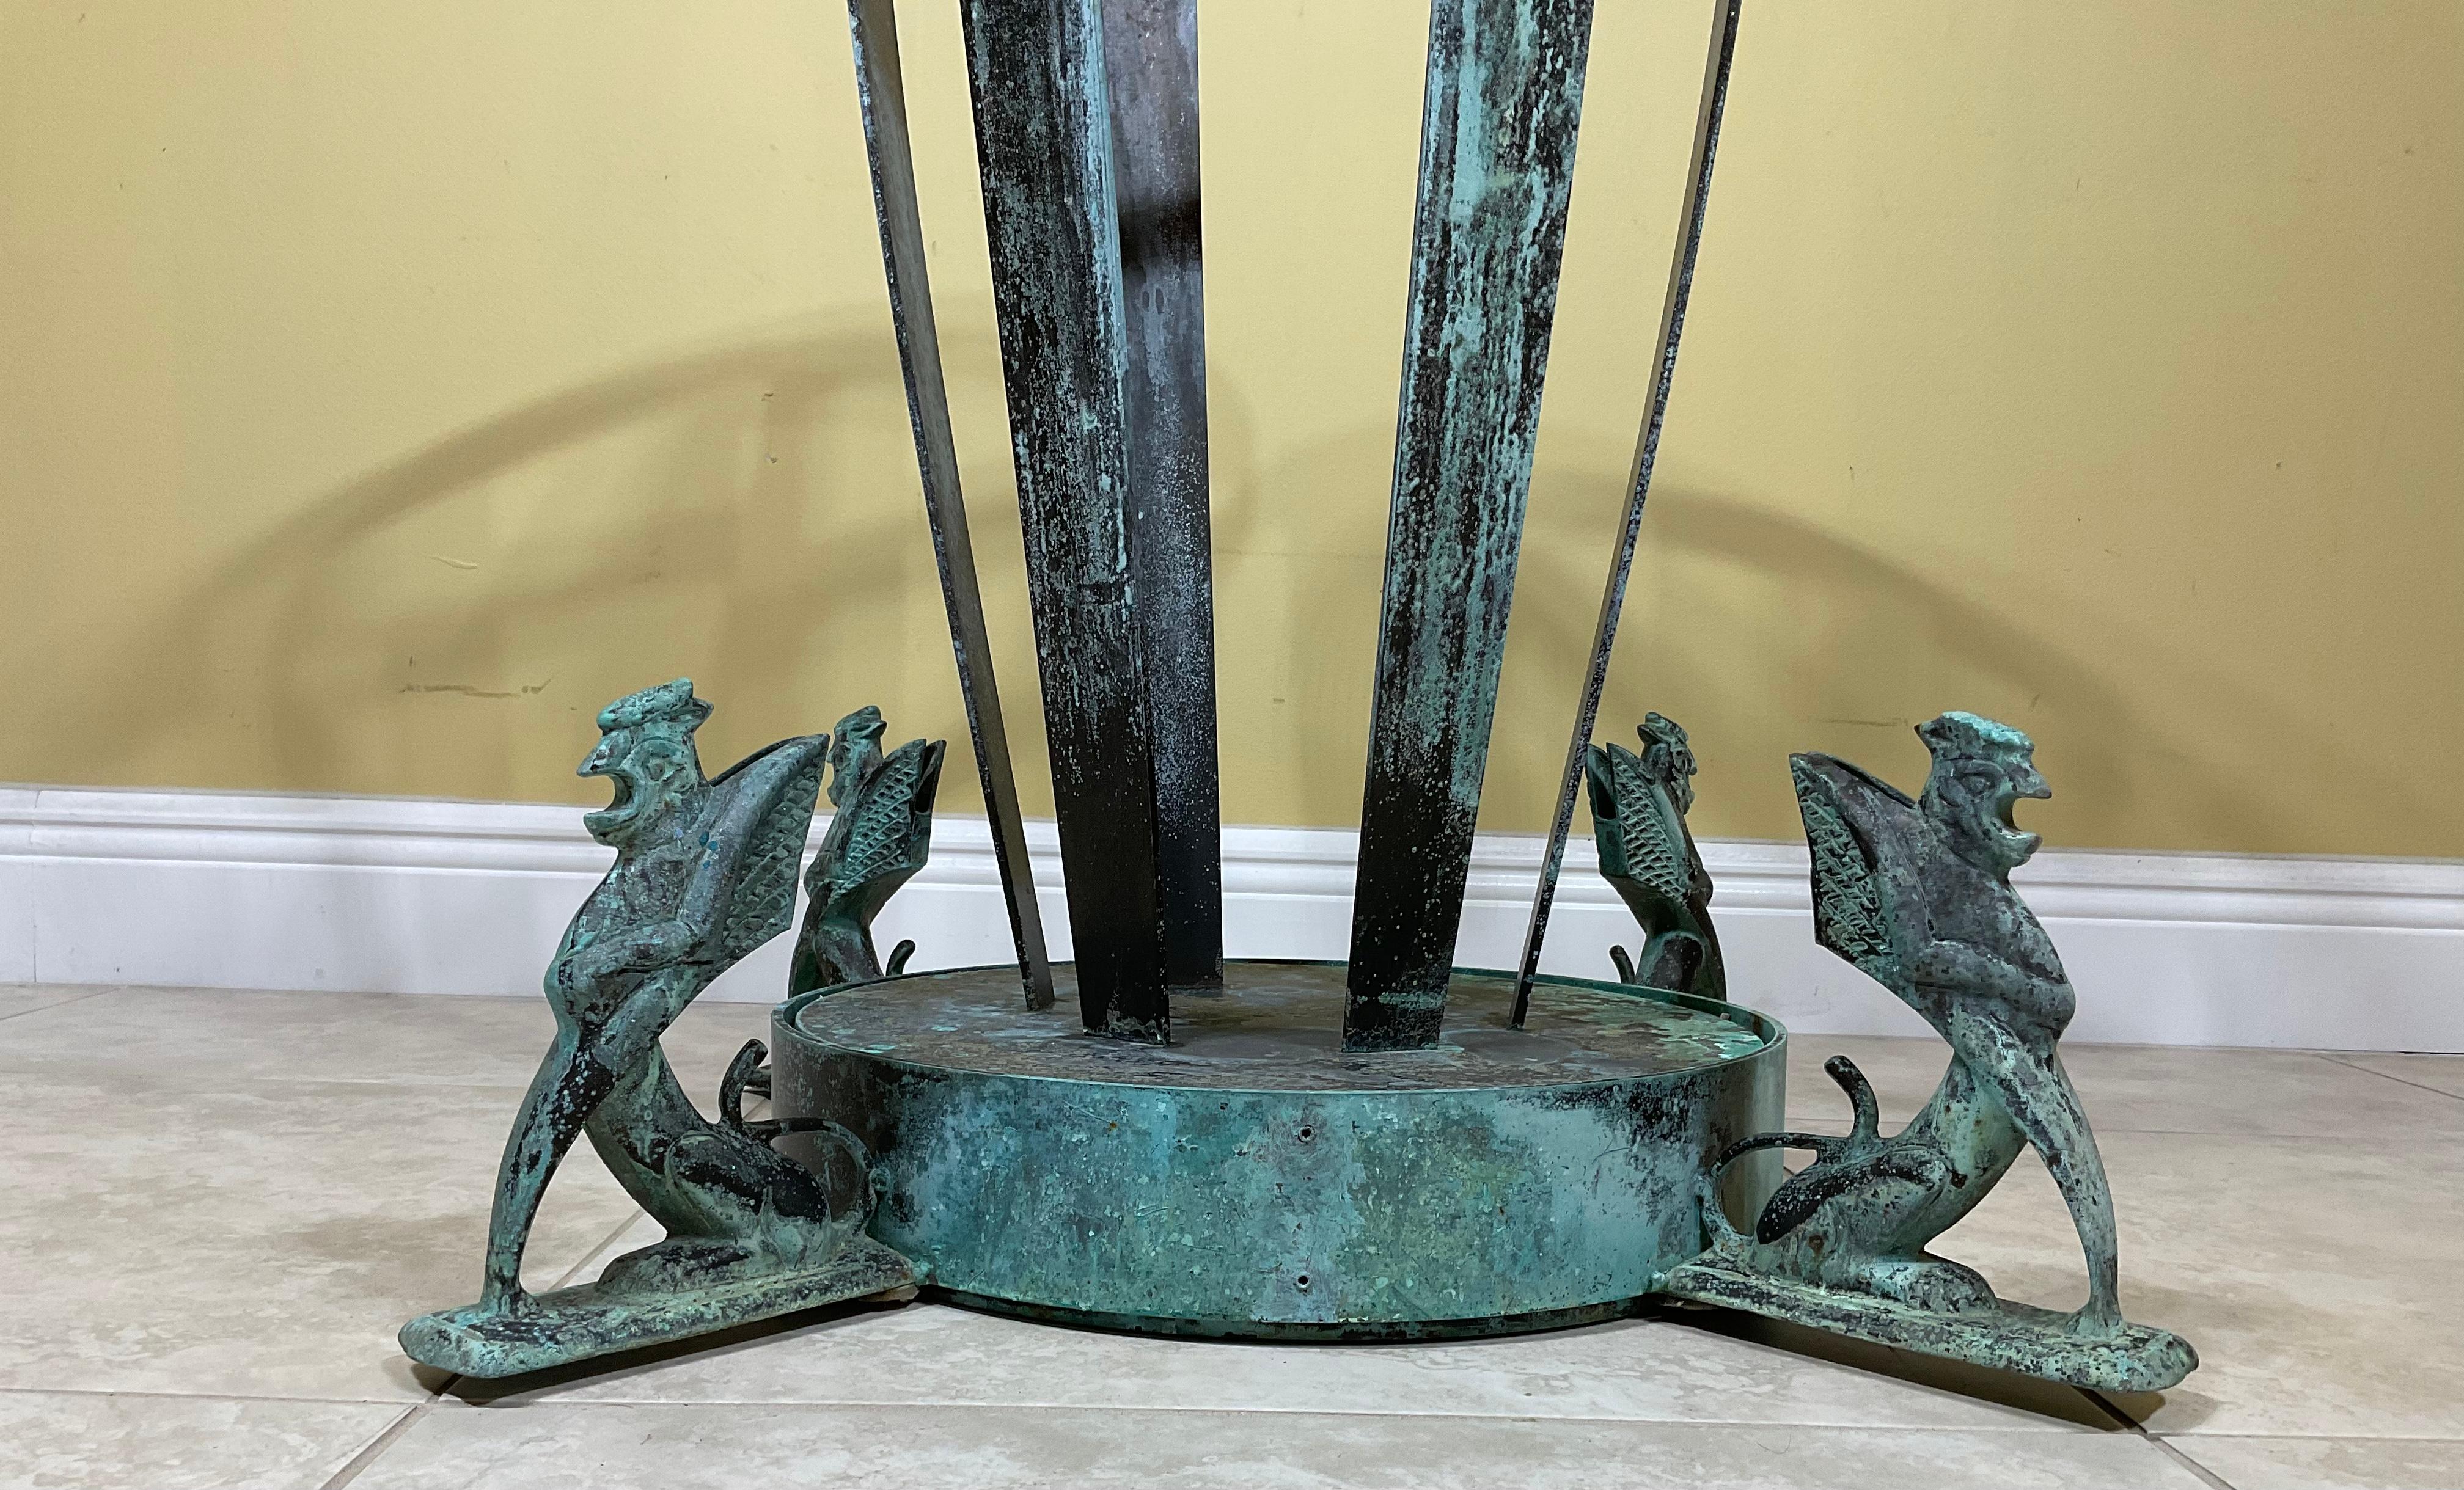 Beautiful table base made of solid bronze and brass, round top with Diameter of 16”.decorative bottom base with four sides with Phoenix bird style on each corner. Weathered oxidise green-turquoise color patina.
Exceptional object of art for display.